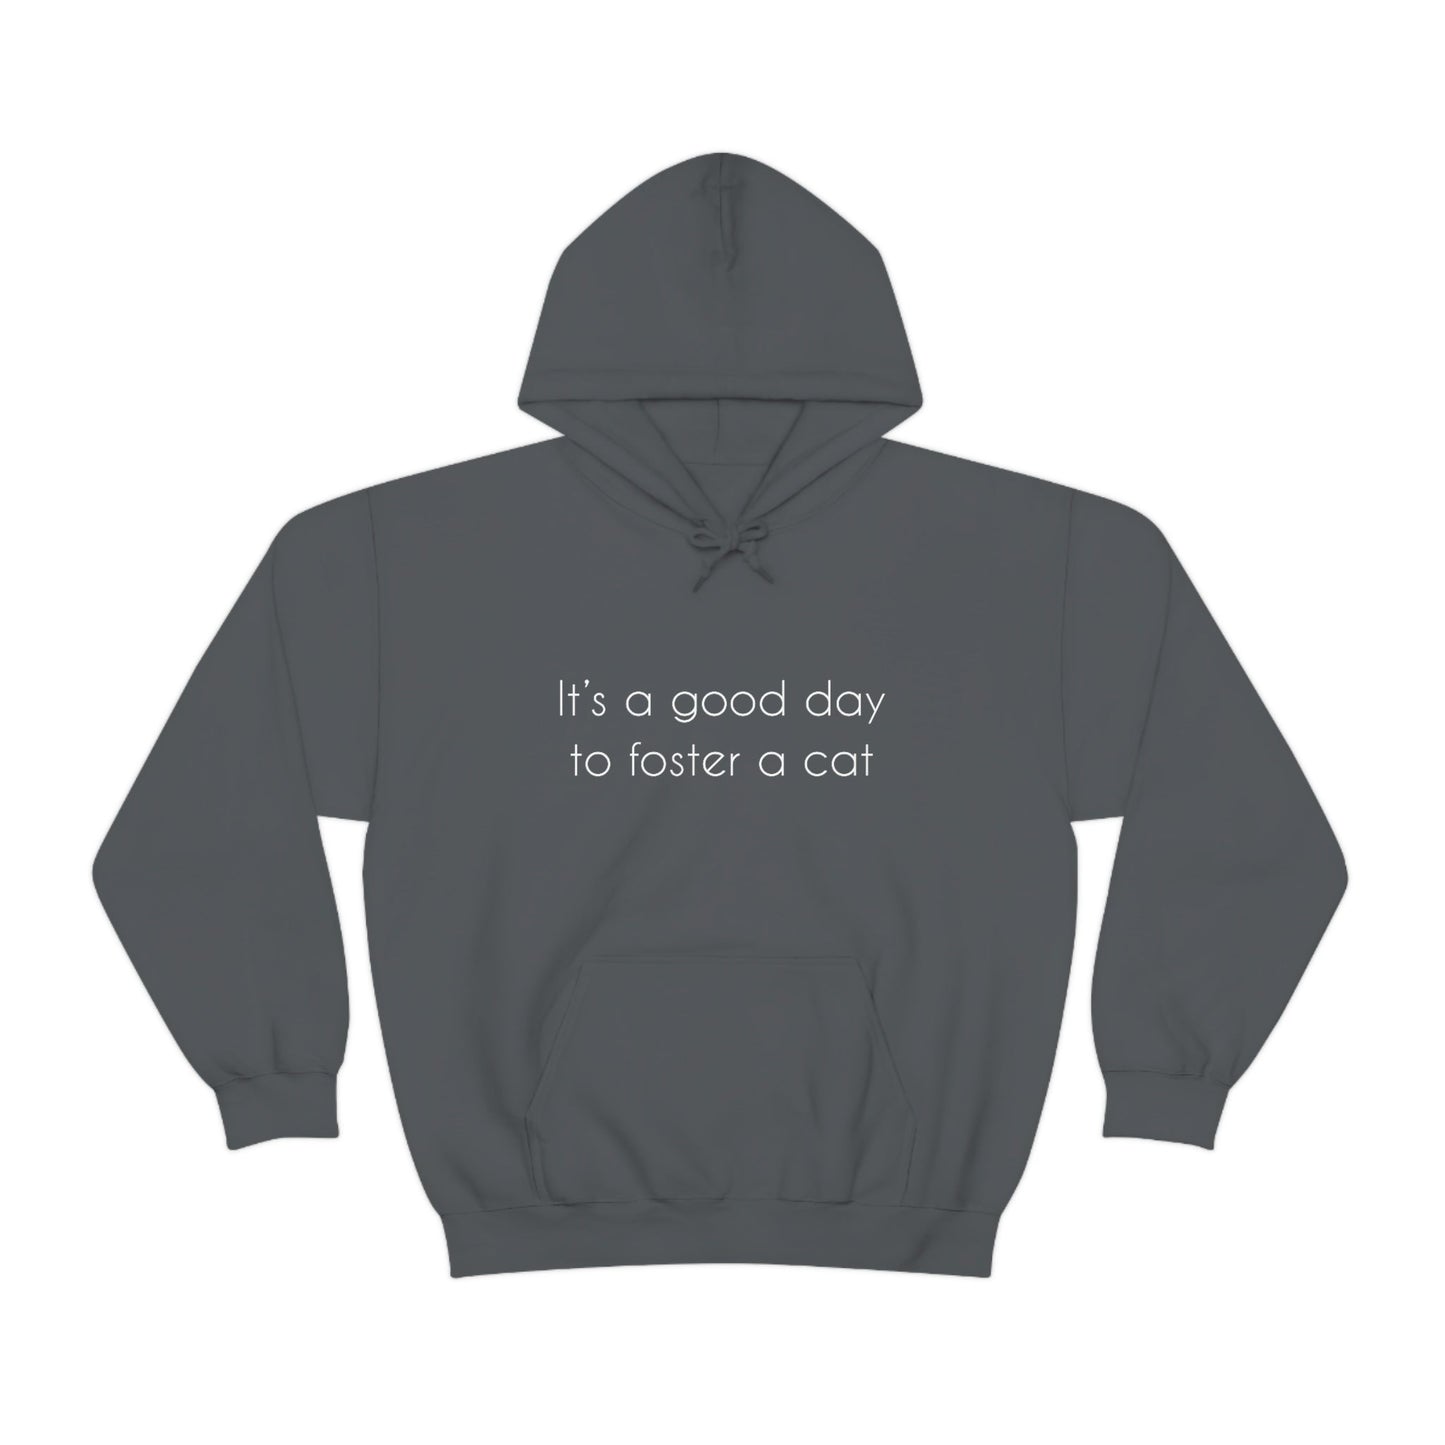 It's A Good Day To Foster A Cat | Hooded Sweatshirt - Detezi Designs-19495169005339865365